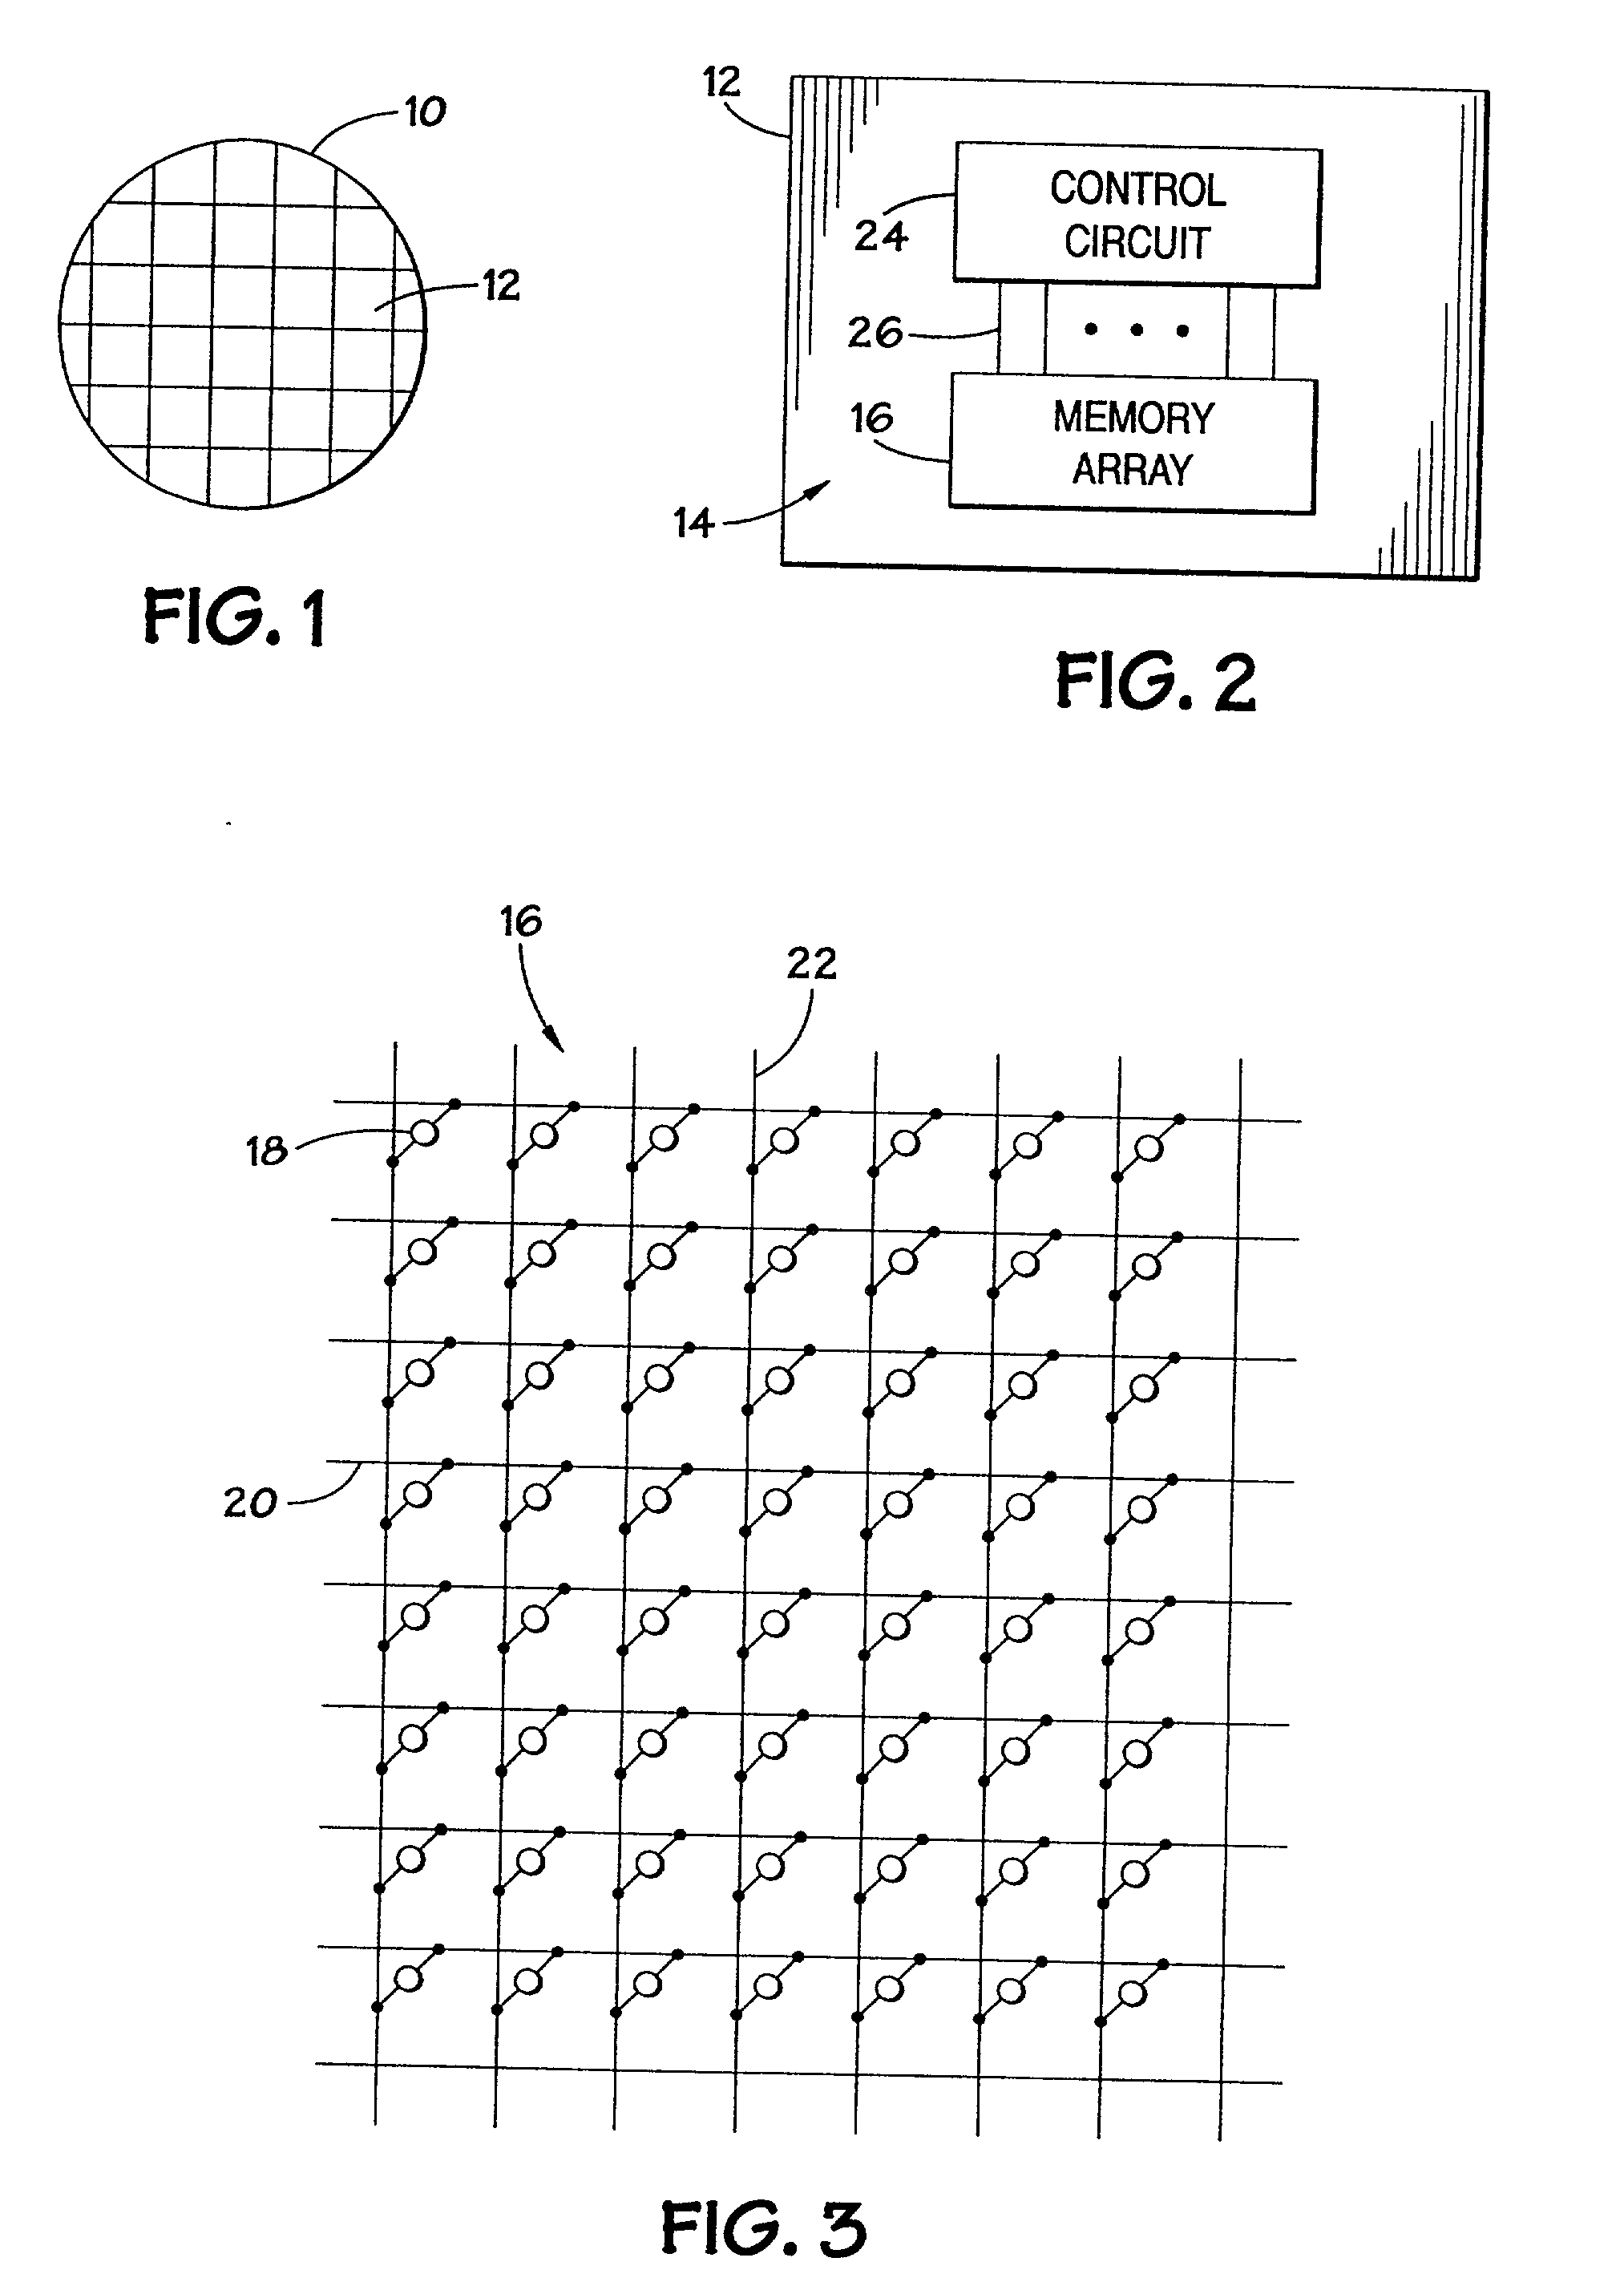 Comparator for determining process variations